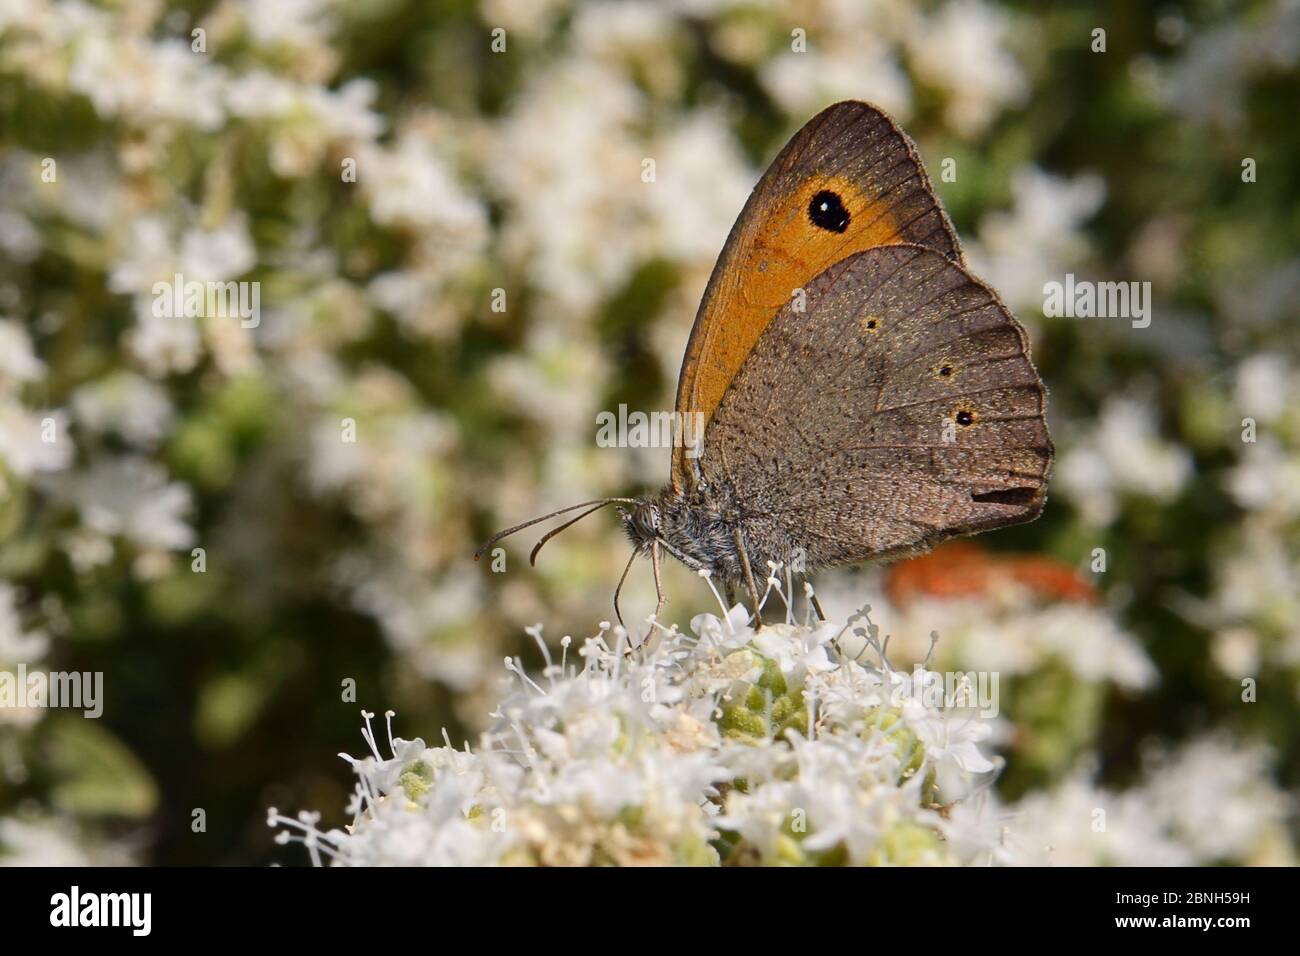 Turkish meadow brown butterfly (Maniola megala) feeding on Cretan oregano (Origanum onites) flowers with wings closed, Lesbos (Lesvos), Greece, May. Stock Photo